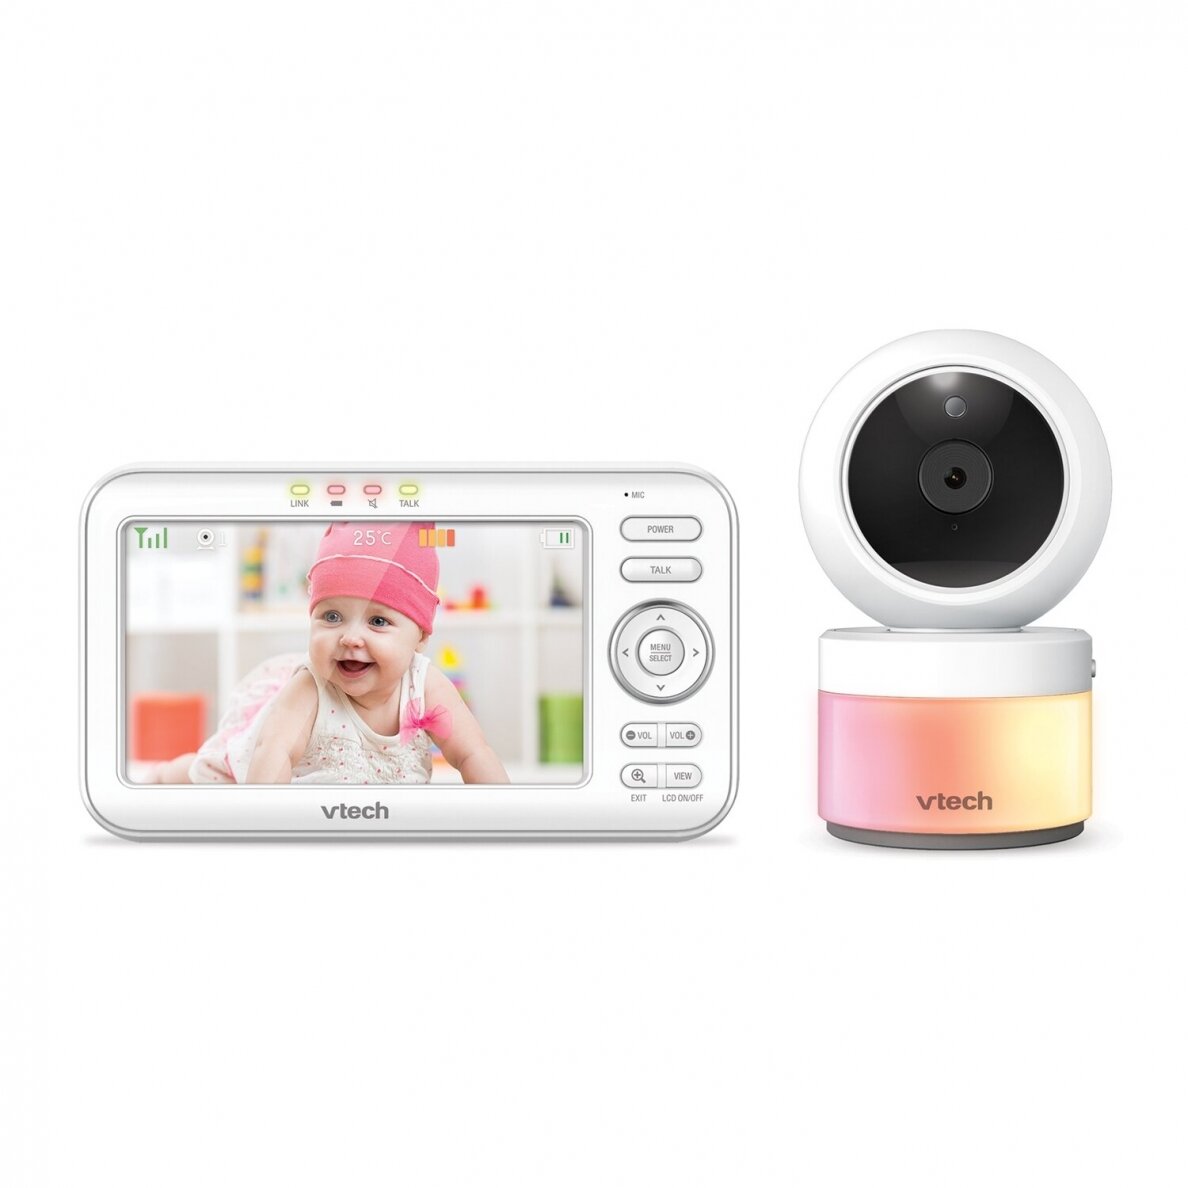 Vtech 5 inch digital video baby monitor with pan and tilt camera VM5463